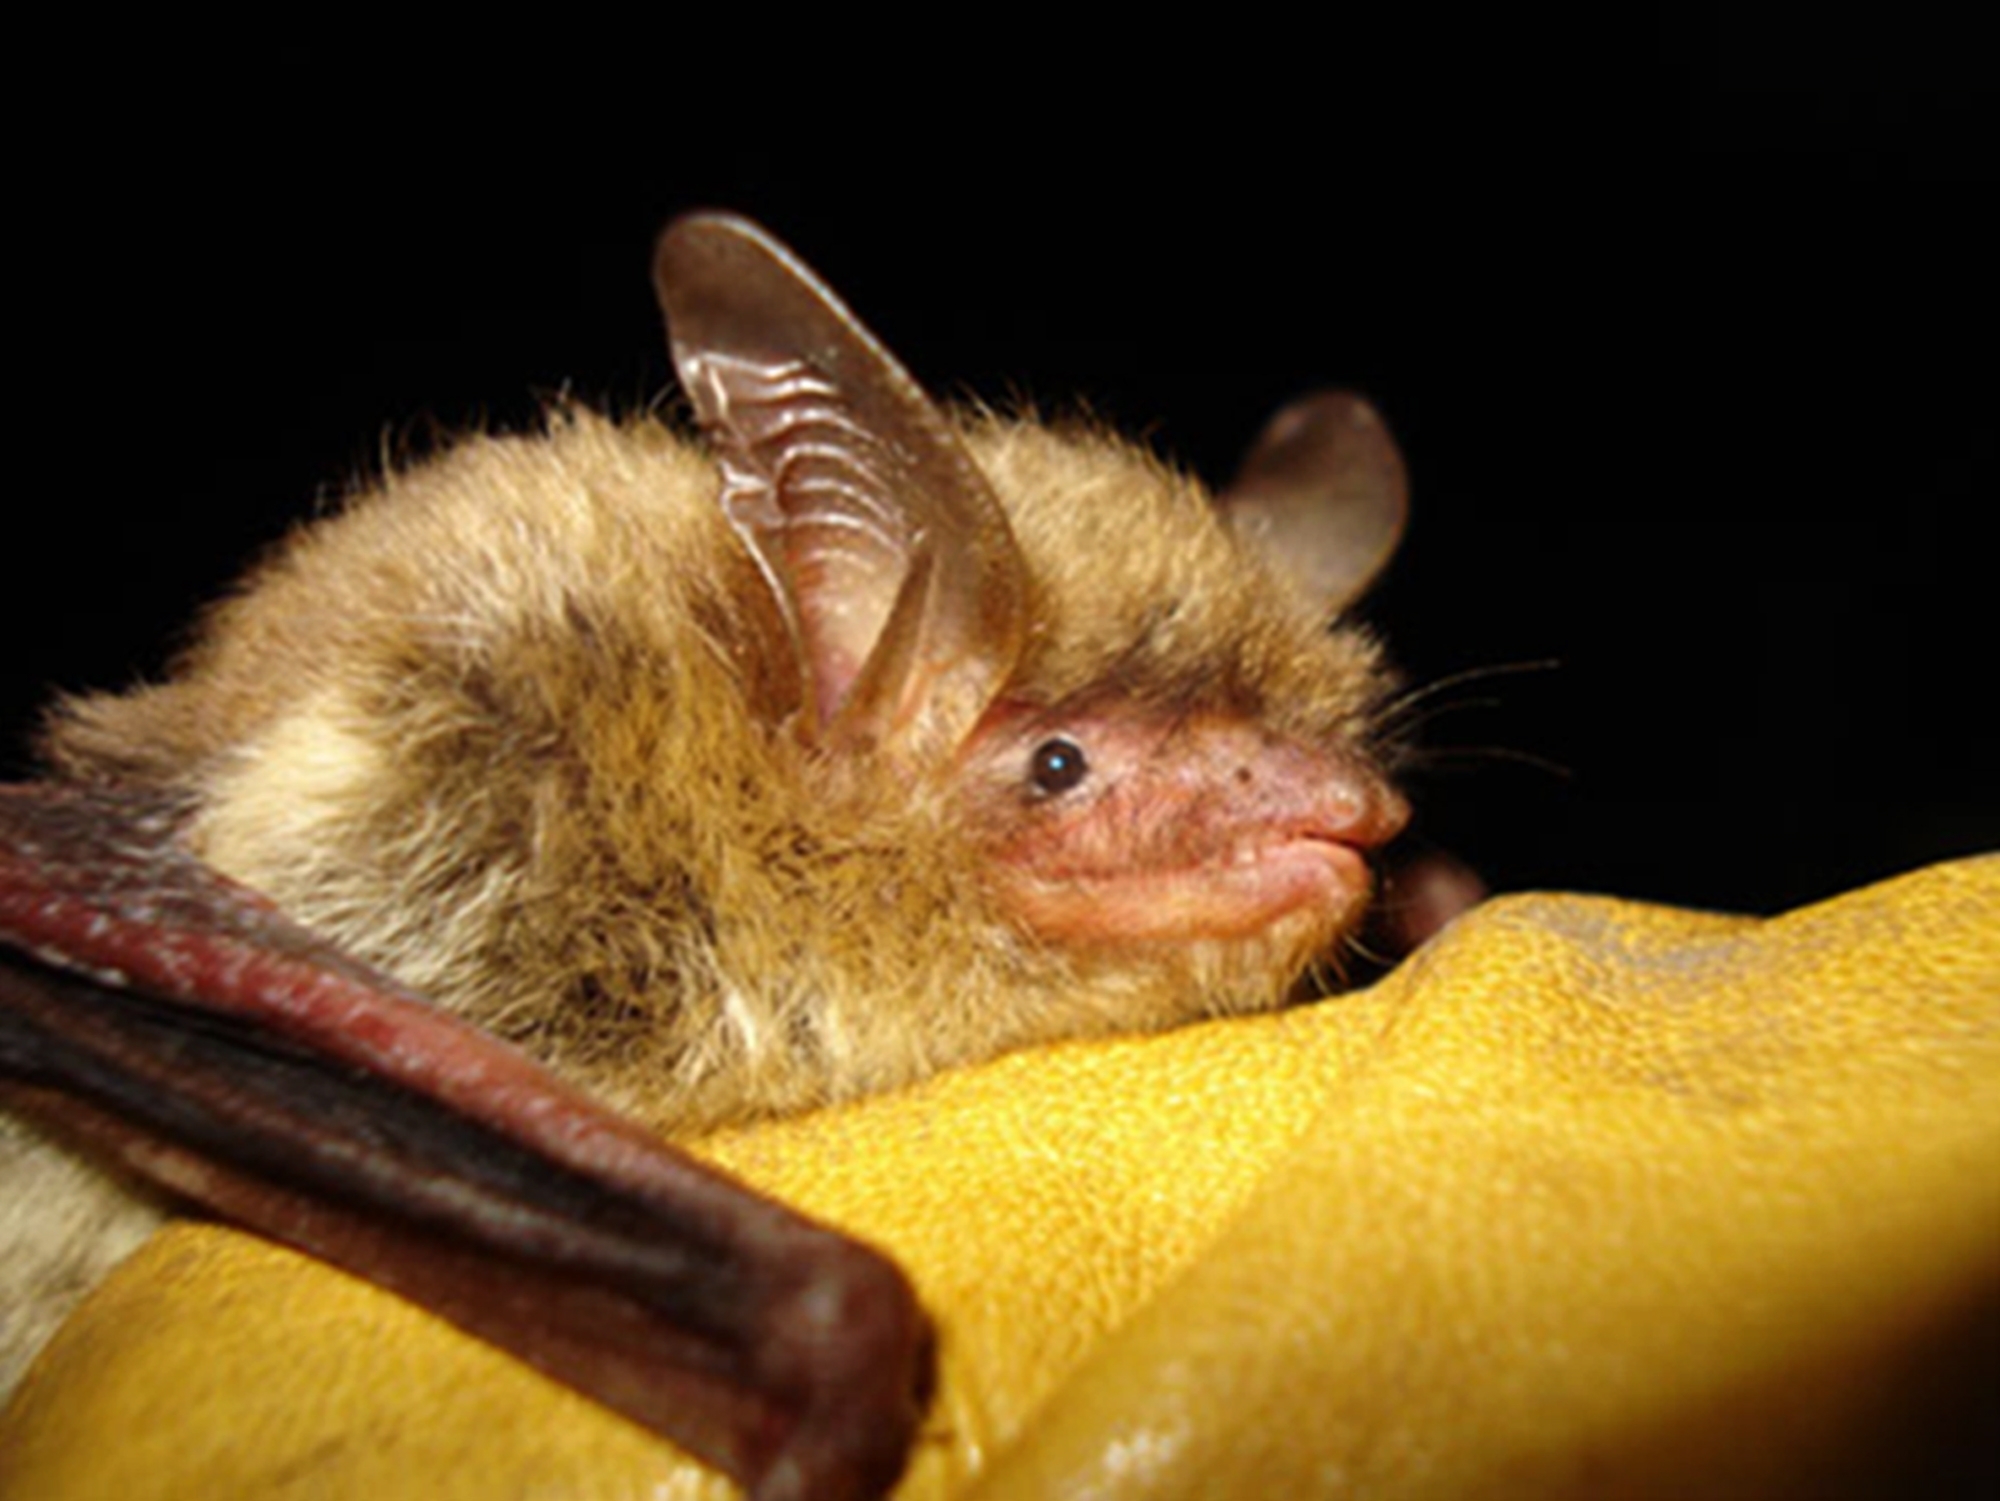 FILE - This undated file photo provided by the Wisconsin Department of Natural Resources shows a northern long-eared bat. The U.S. Fish and Wildlife Service is proposing to list it as endangered. Officials say its population has fallen sharply because of a fungal disease called white-nose syndrome, which has spread across nearly 80% of the species' range. (Wisconsin Department of Natural Resources via AP, File)